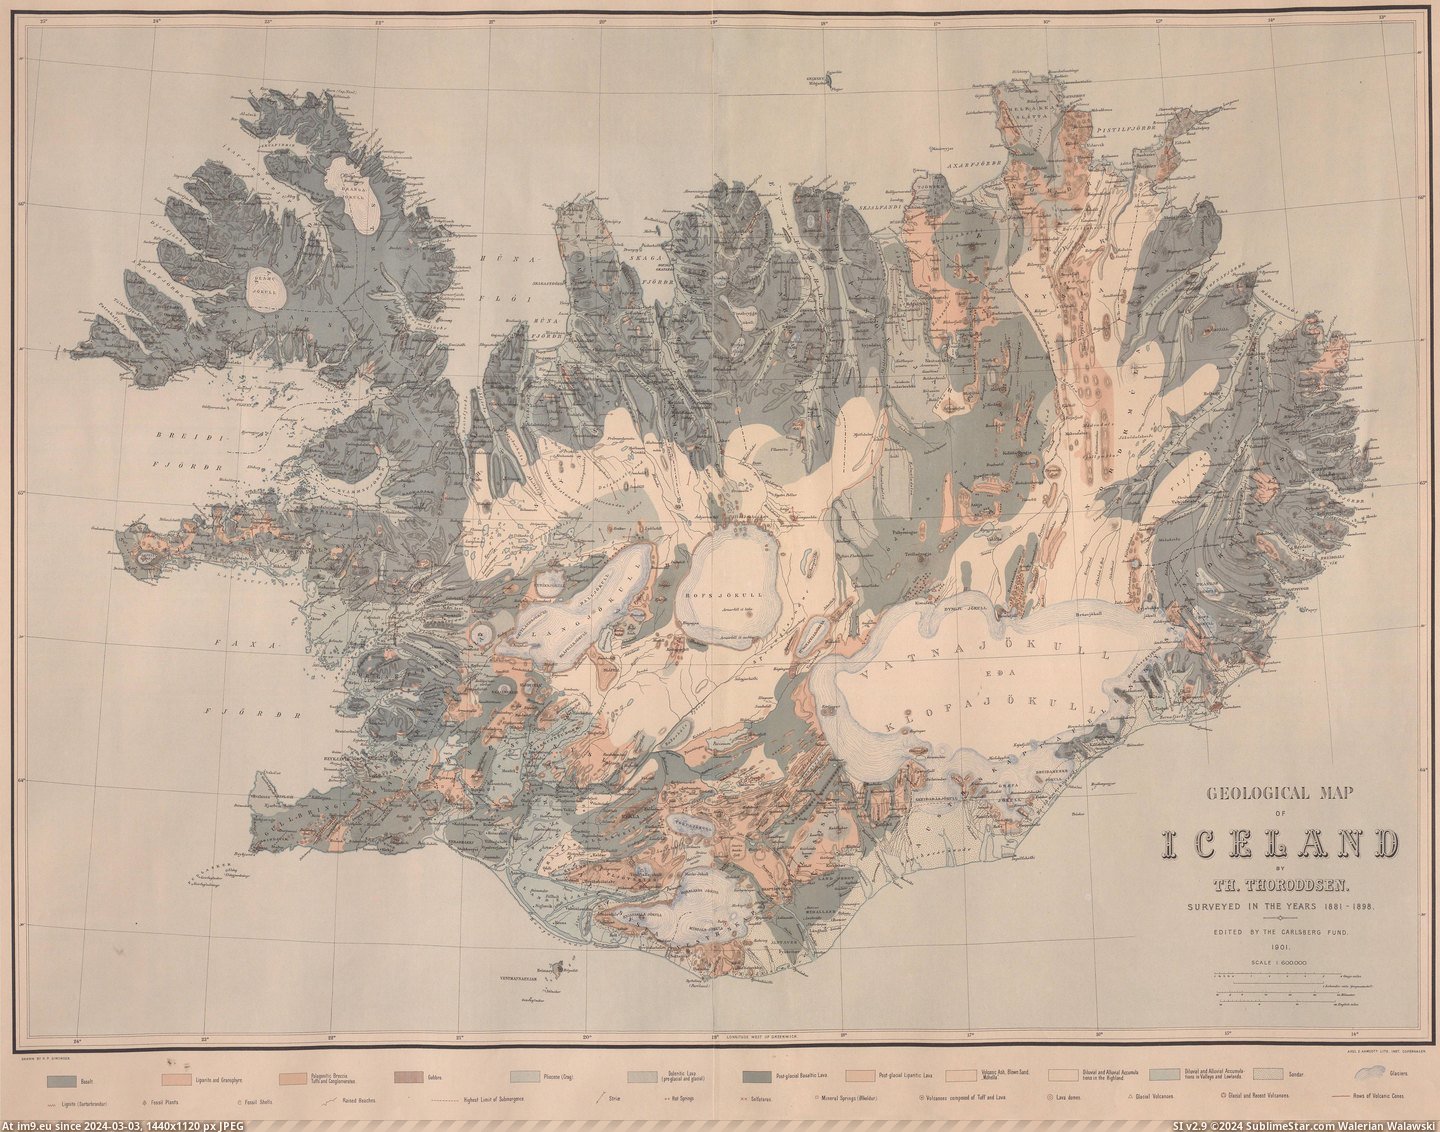 #Map #Geological #Iceland [Mapporn] Geological Map of Iceland - 1901 [6300x4911] Pic. (Image of album My r/MAPS favs))